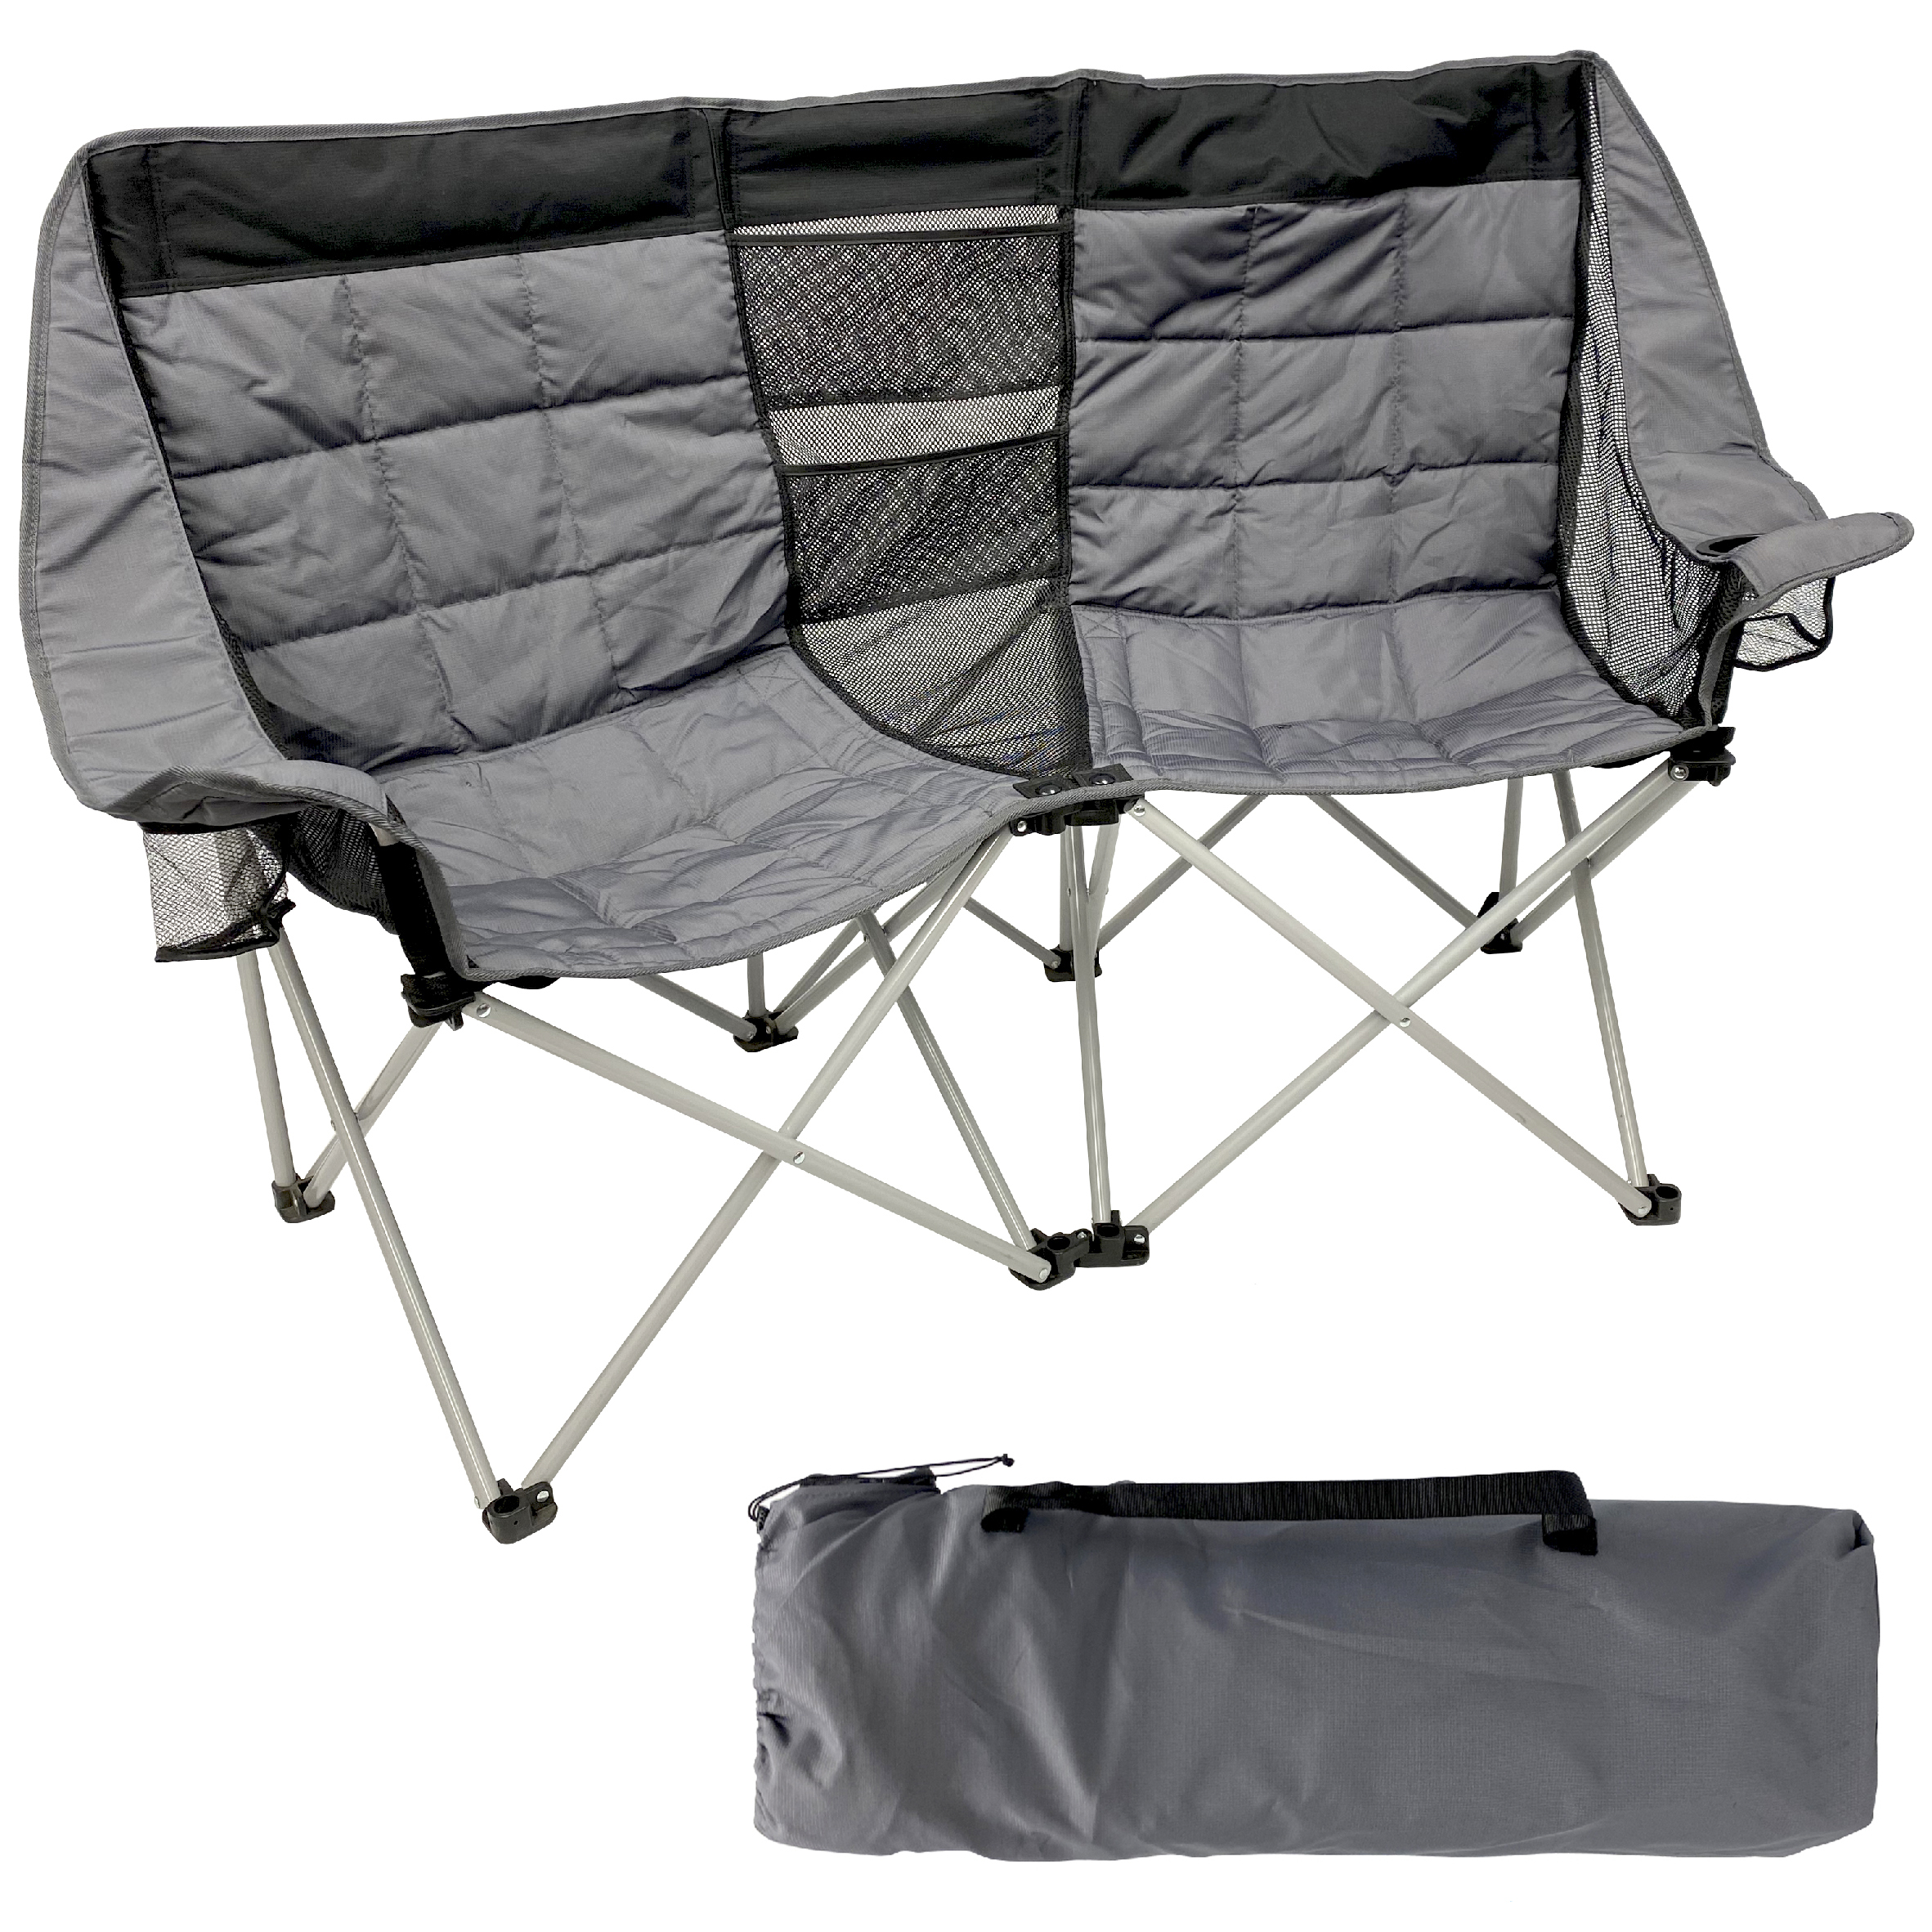 EasyGo Product Camping Chair - Double Love Seat - Heavy Duty Oversized Camping RV Chair Folds Easily and is Padded - Black Grey - image 1 of 5